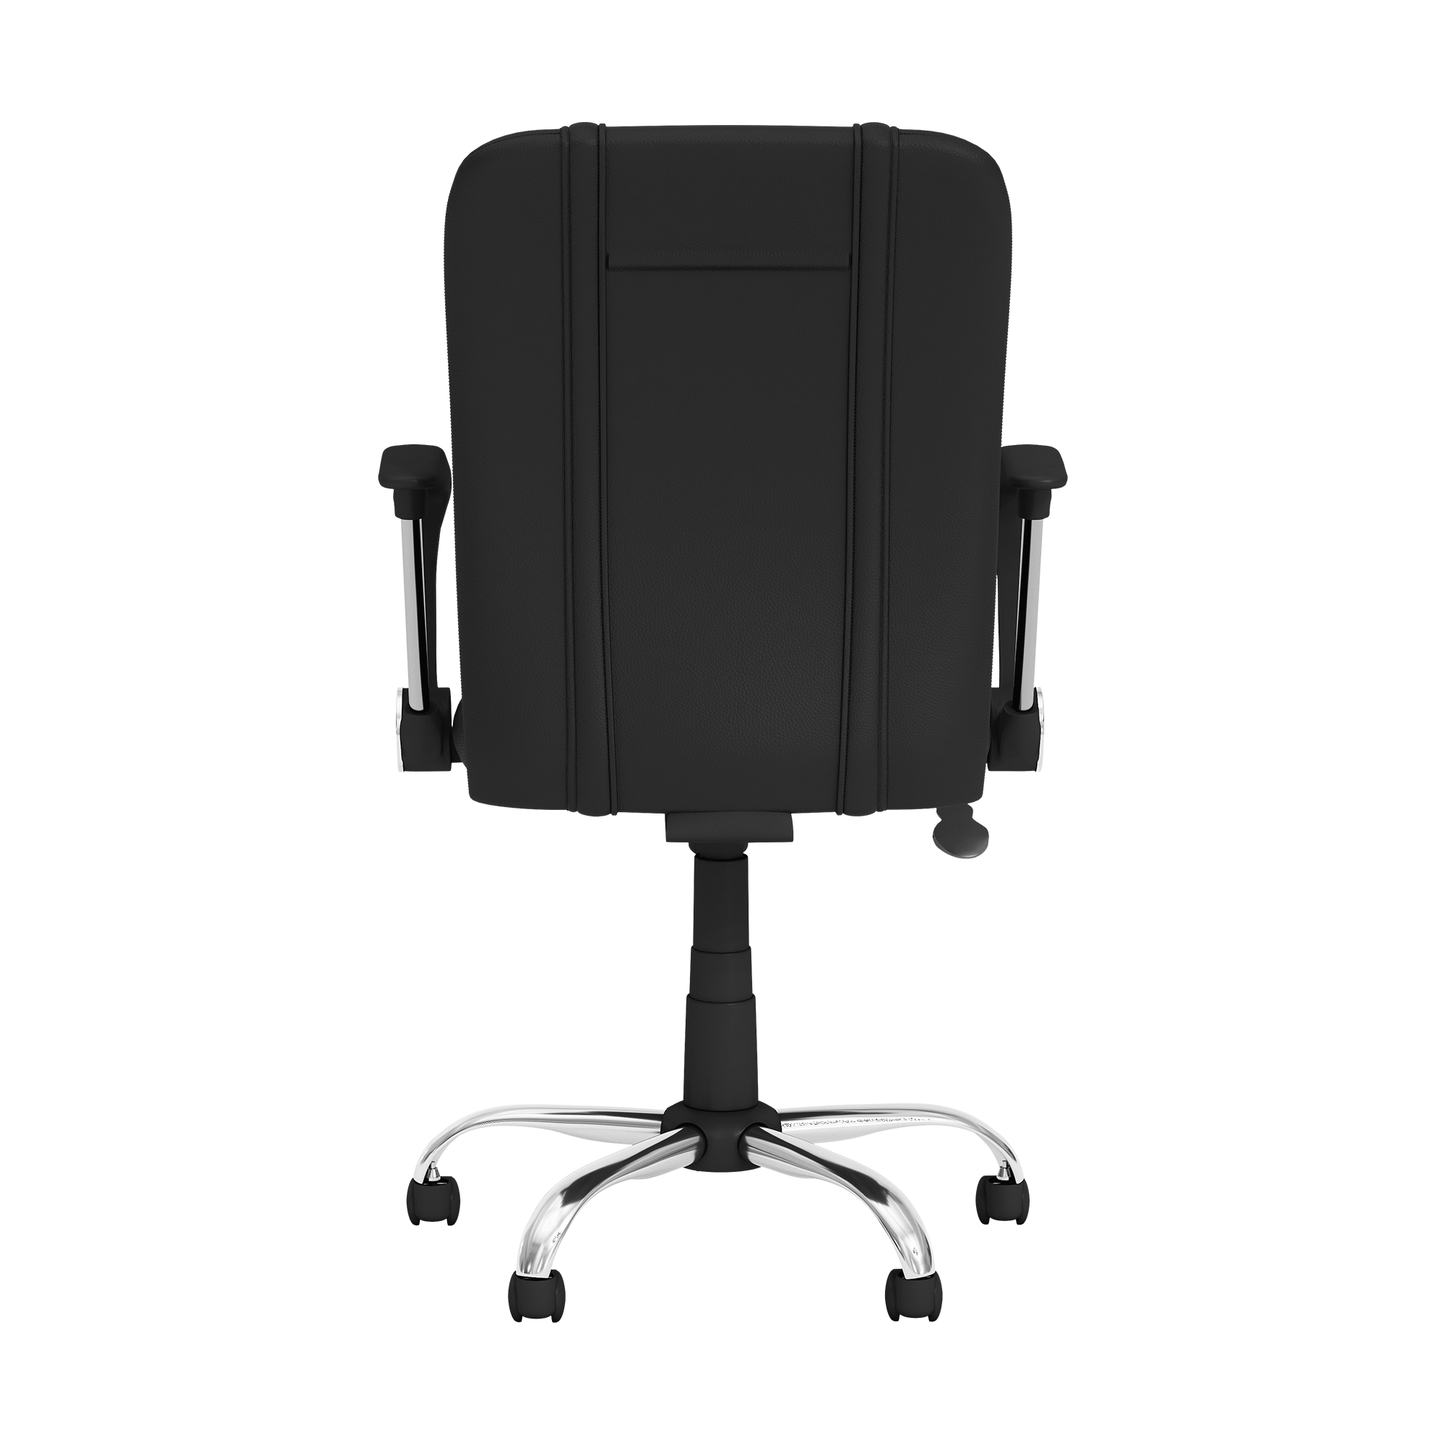 Curve Task Chair with Isles Gaming Team with Text Logo